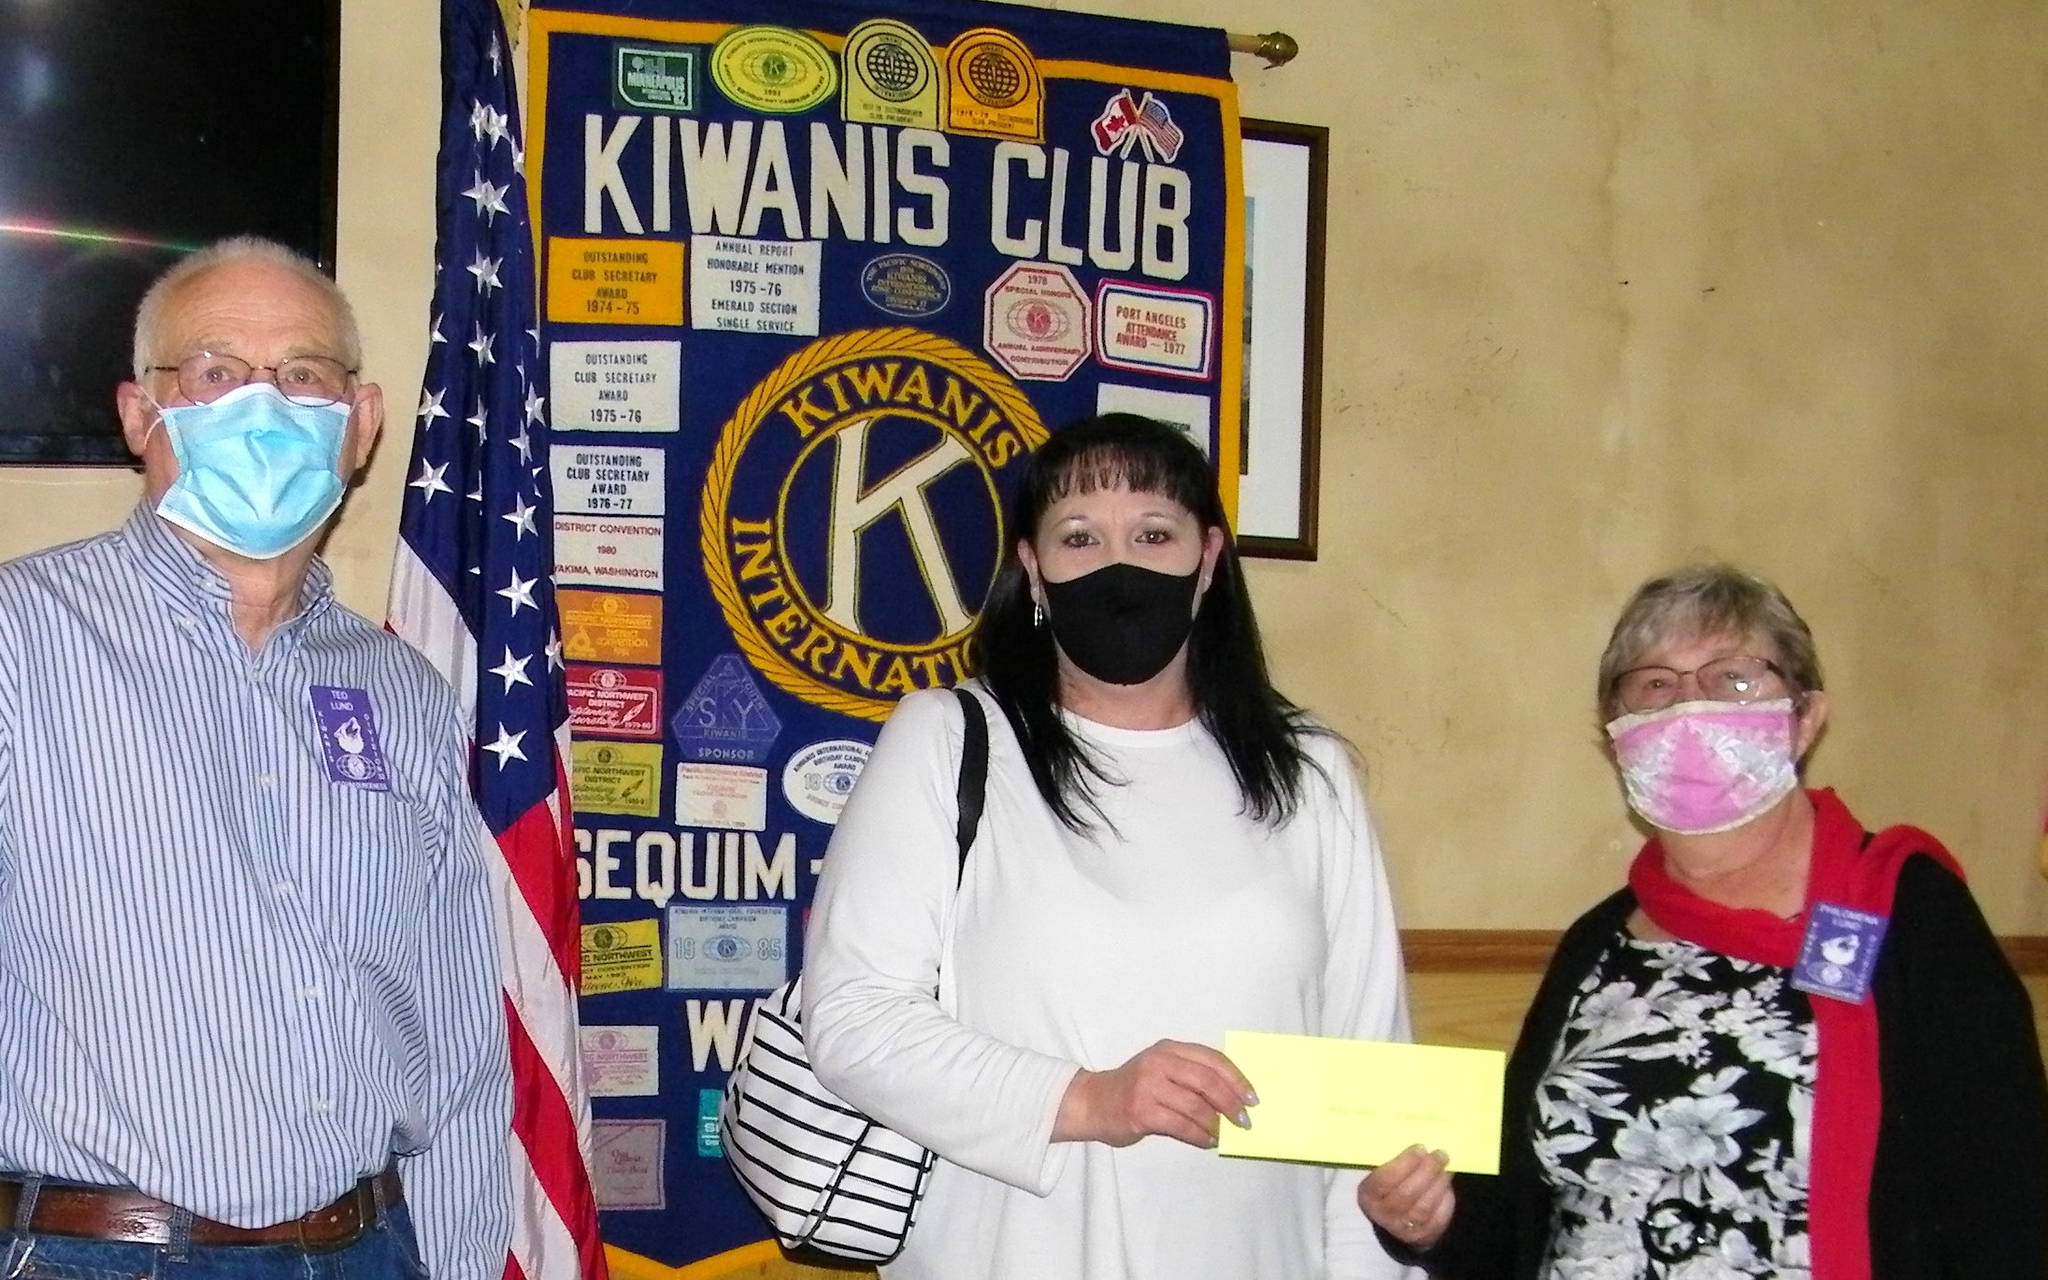 President Ted Lund, on left, and treasurer Philomena Lund of the Kiwanis of Sequim-Dungeness, on right, present Nicole Goettling, owner-director of Bibity Bobity, a check for $275 to help install a shaded area outside for learning and play as part of a Kiwanis “mini-grant” program. Submitted photo